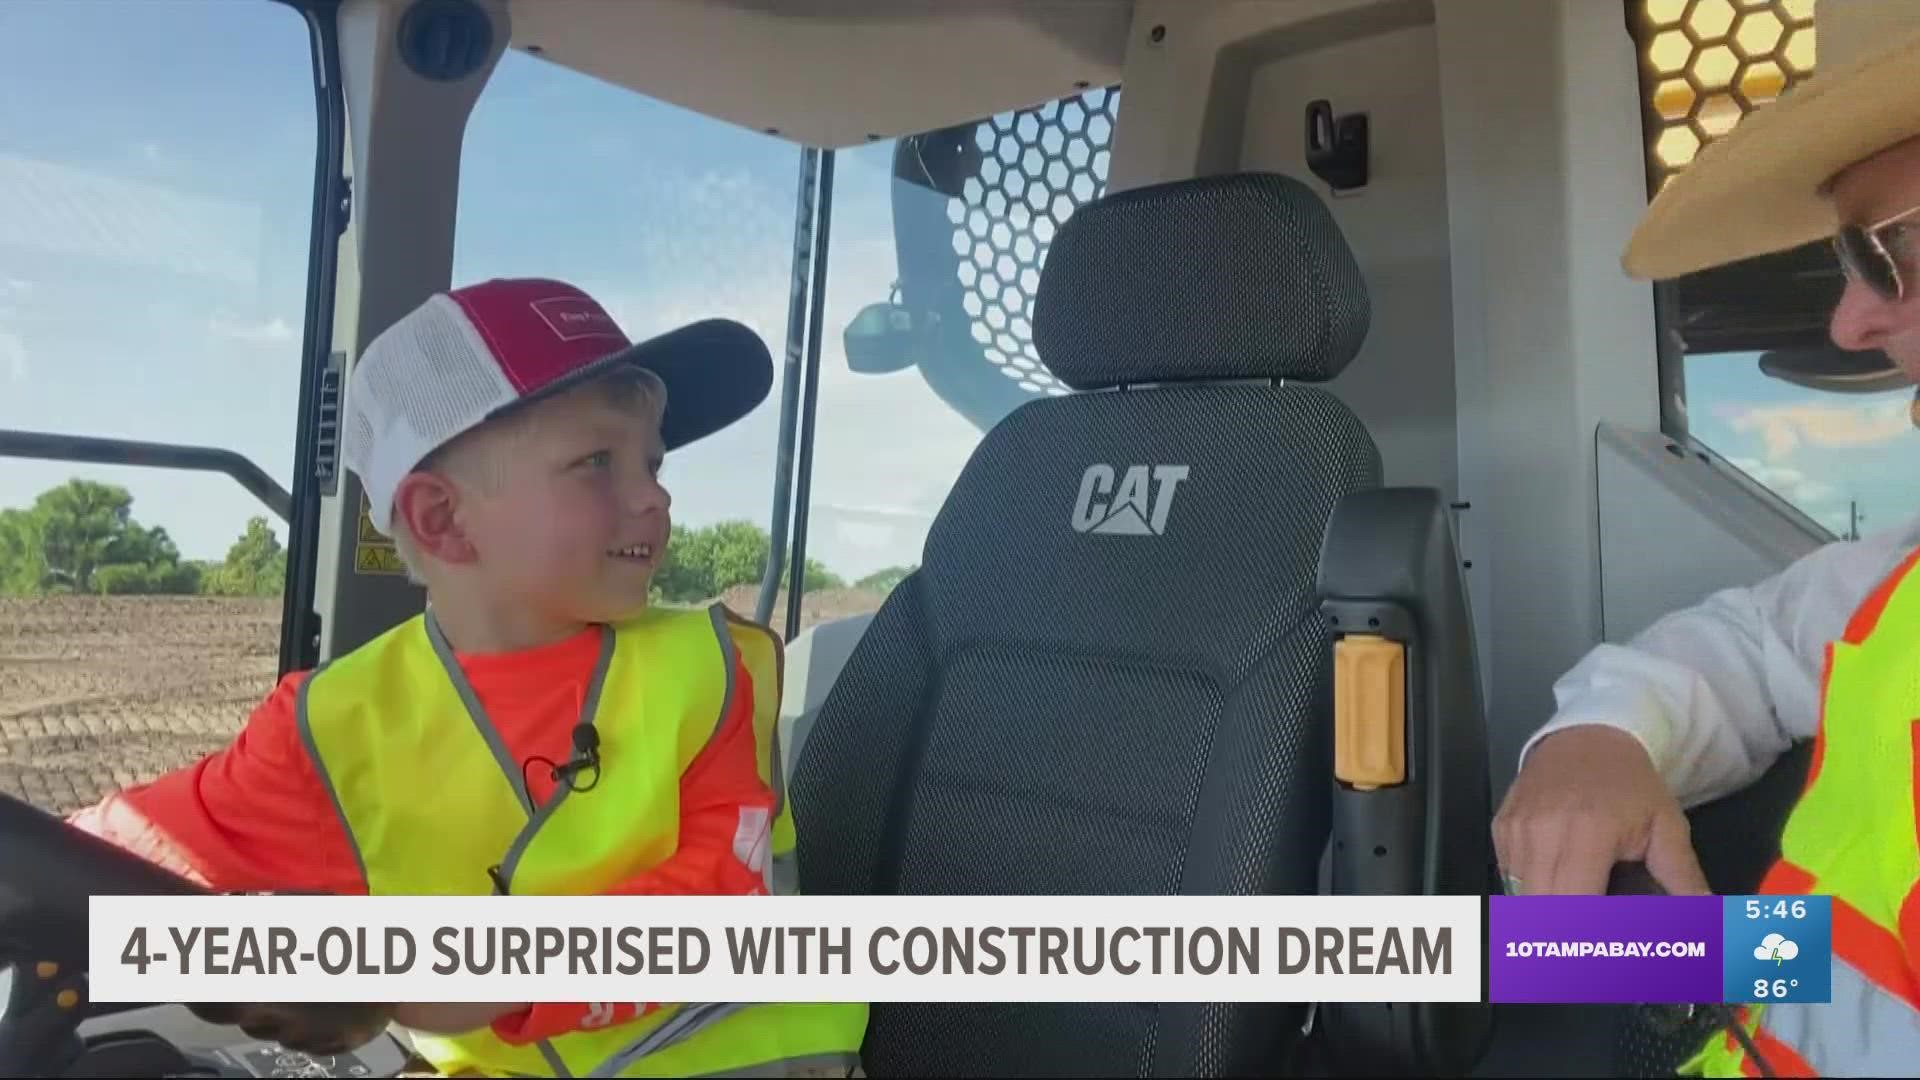 Owen Hart says he wants to be a heavy equipment operator when he grows up and defeats cancer.